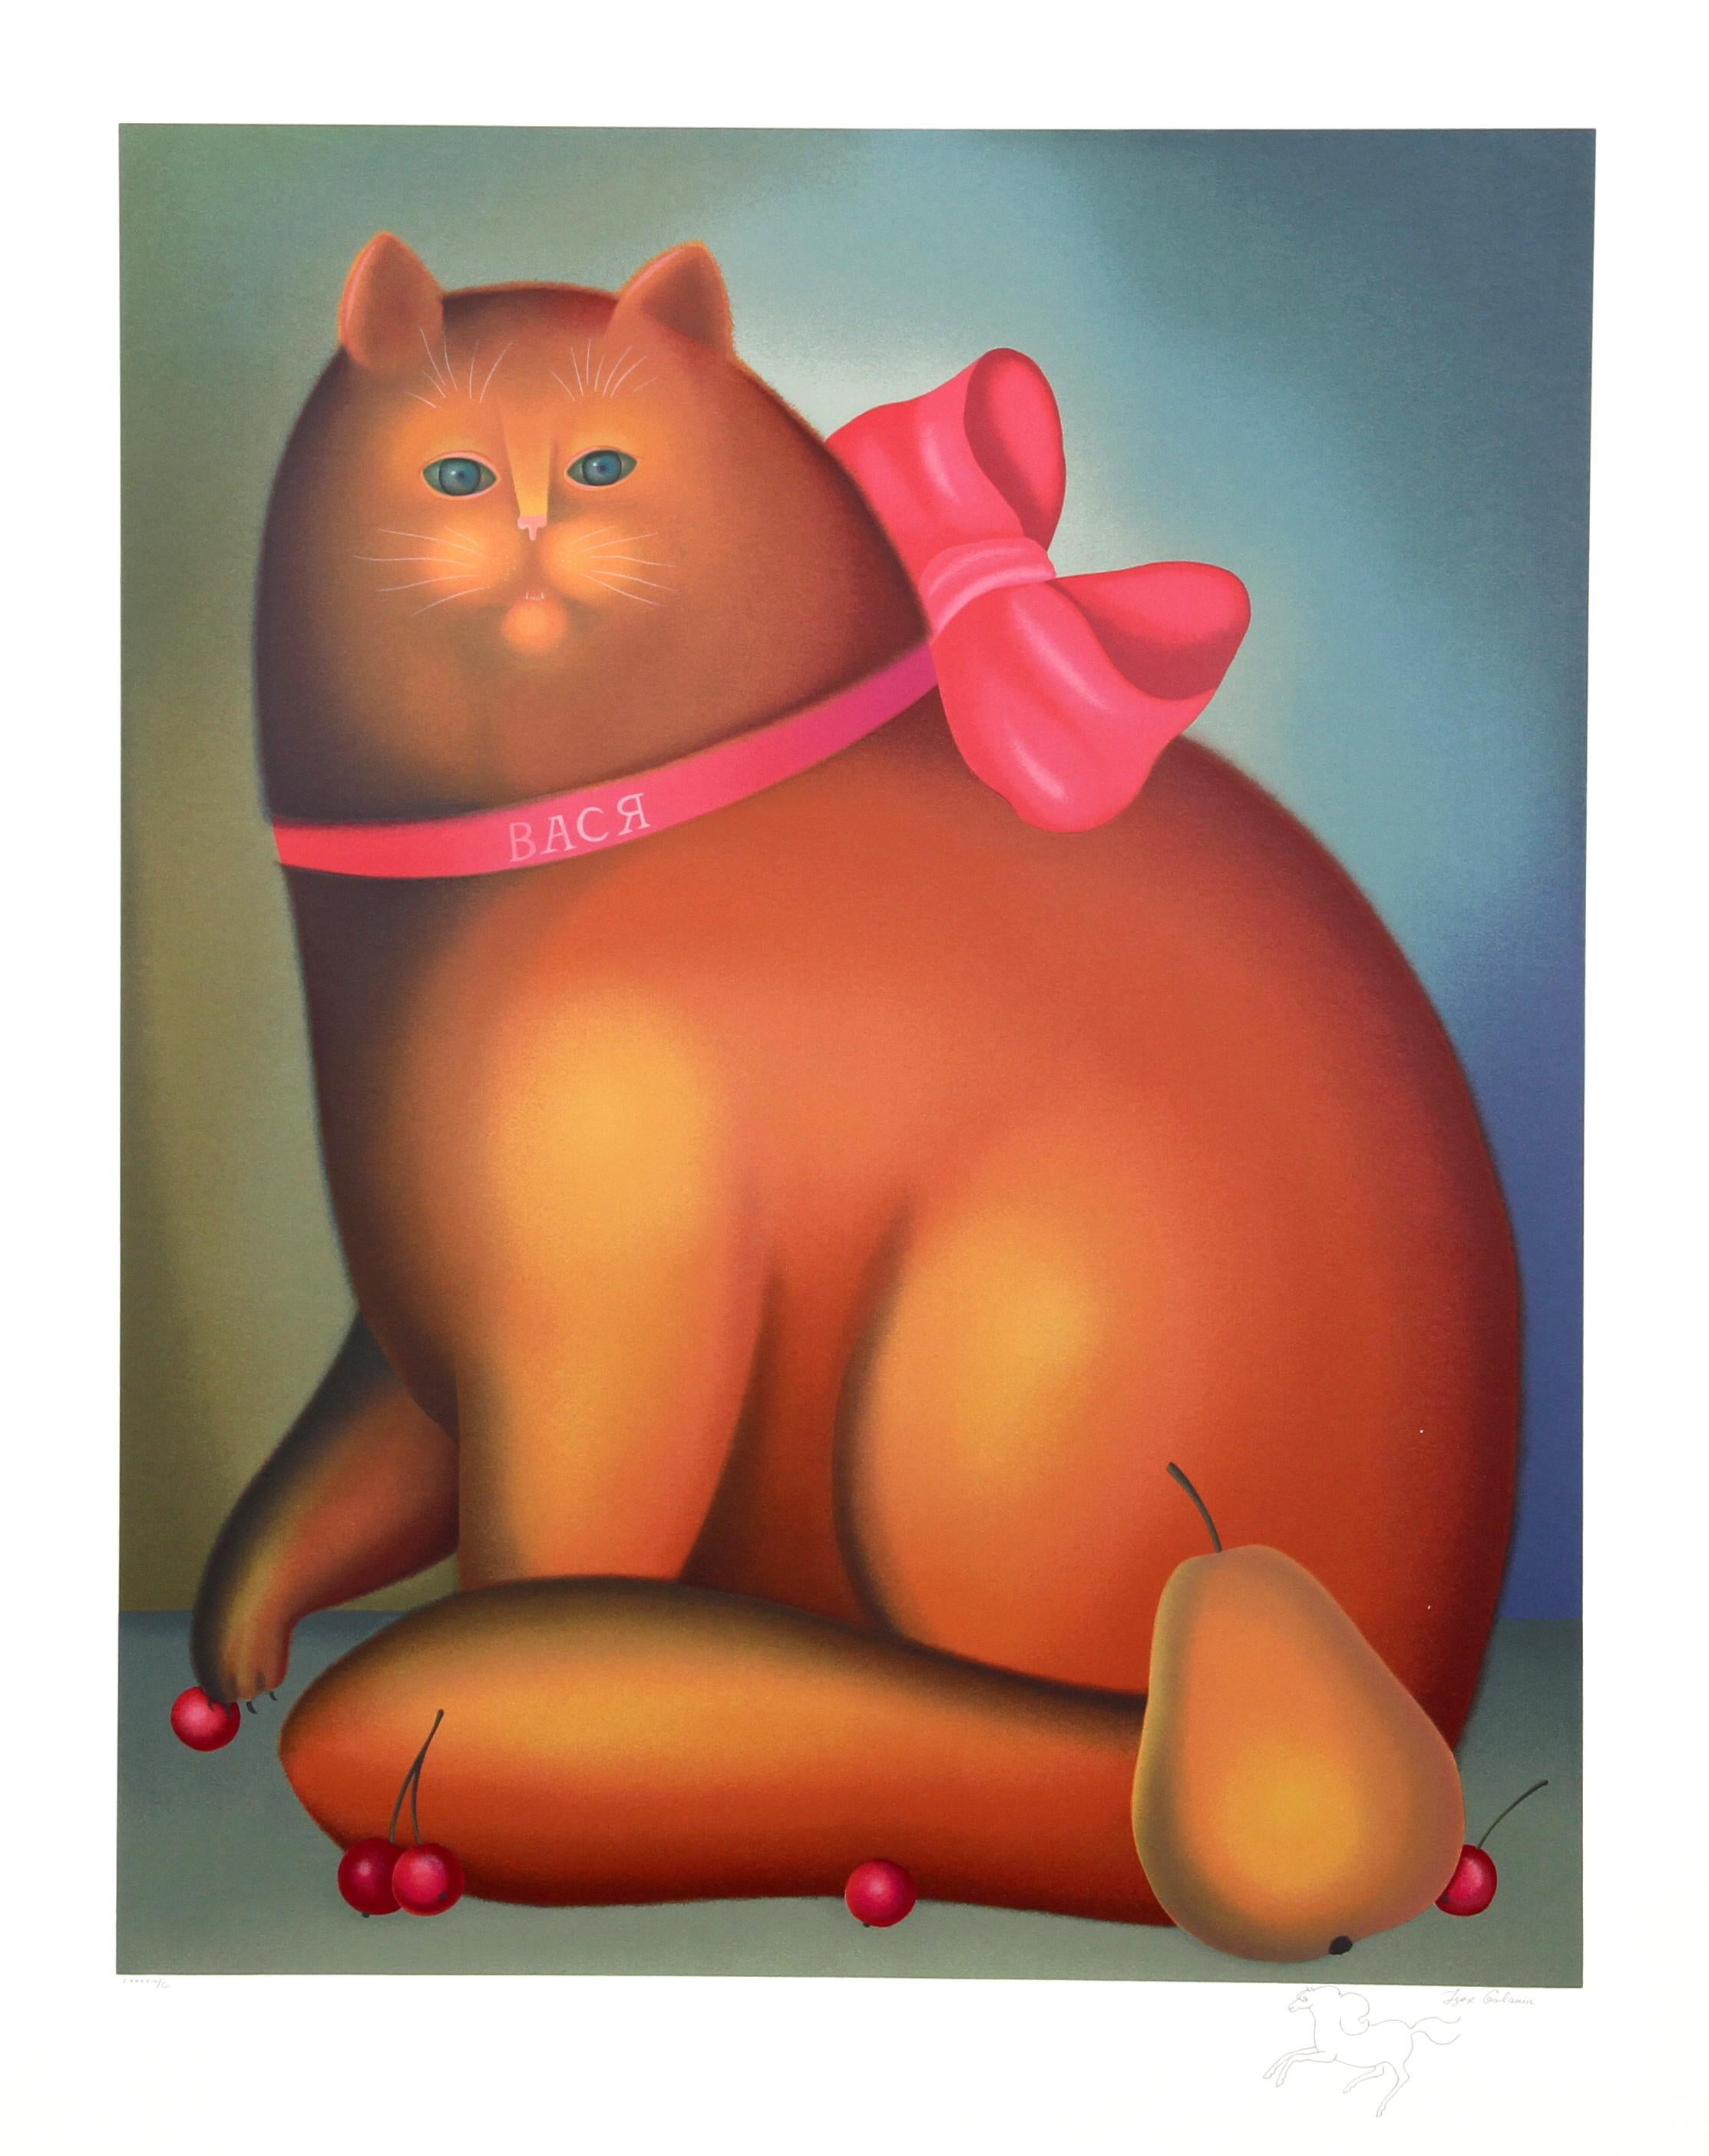 Artist: Igor Galanin, Russian/American (1937 - )
Title: Cat with a Bow
Year: circa 1985
Medium: Serigraph, signed and numbered in pencil 
Edition: 100
Size: 40.5  x 32.5 in. (102.87  x 82.55 cm)